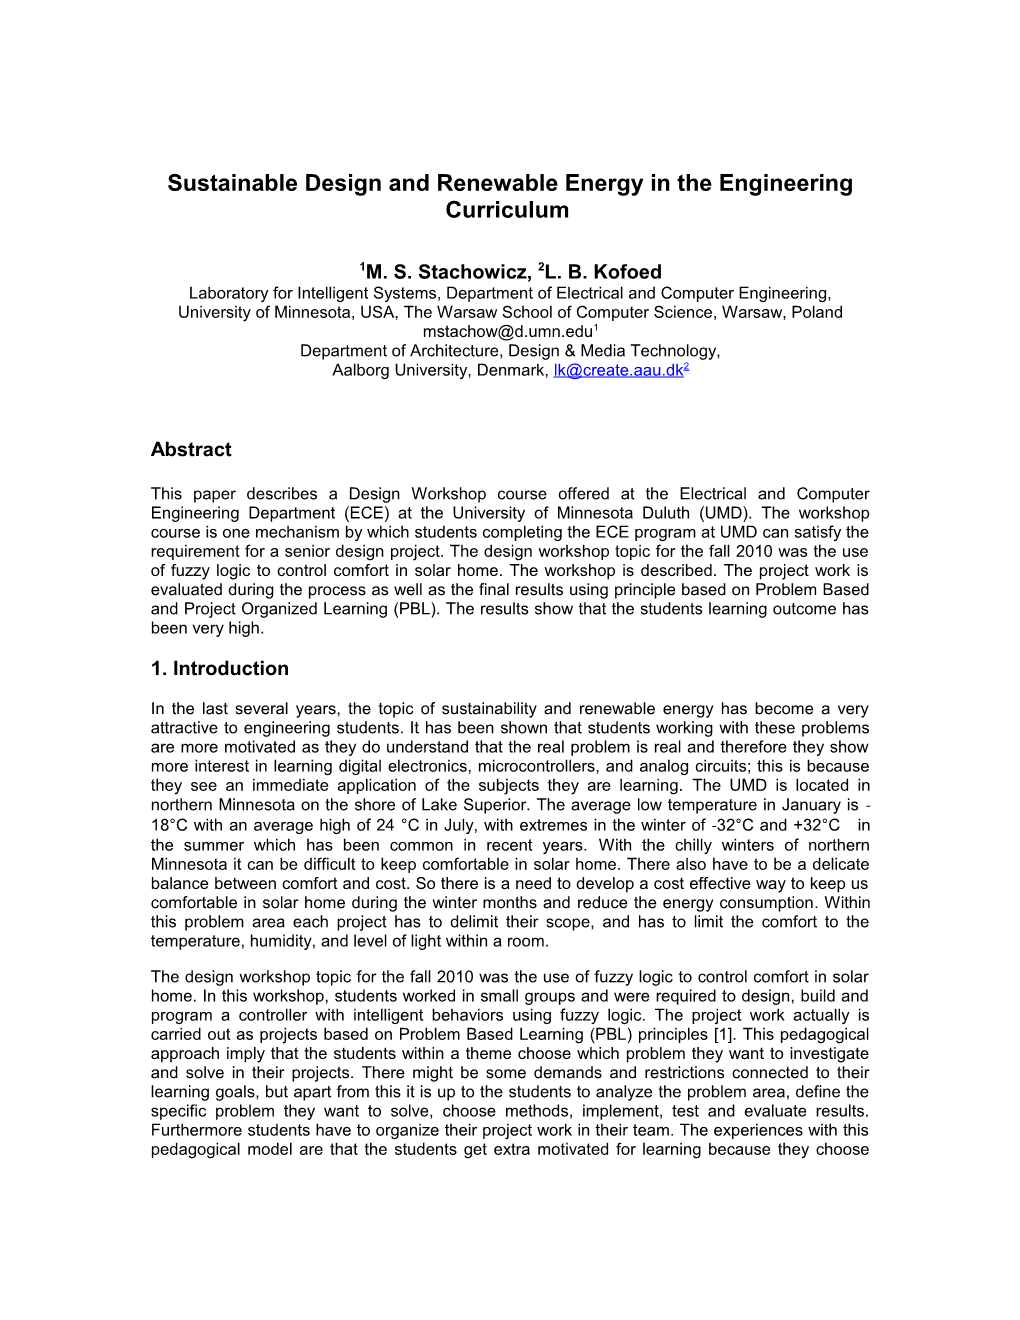 Sustainable Design and Renewable Energy in the Engineering Curriculum